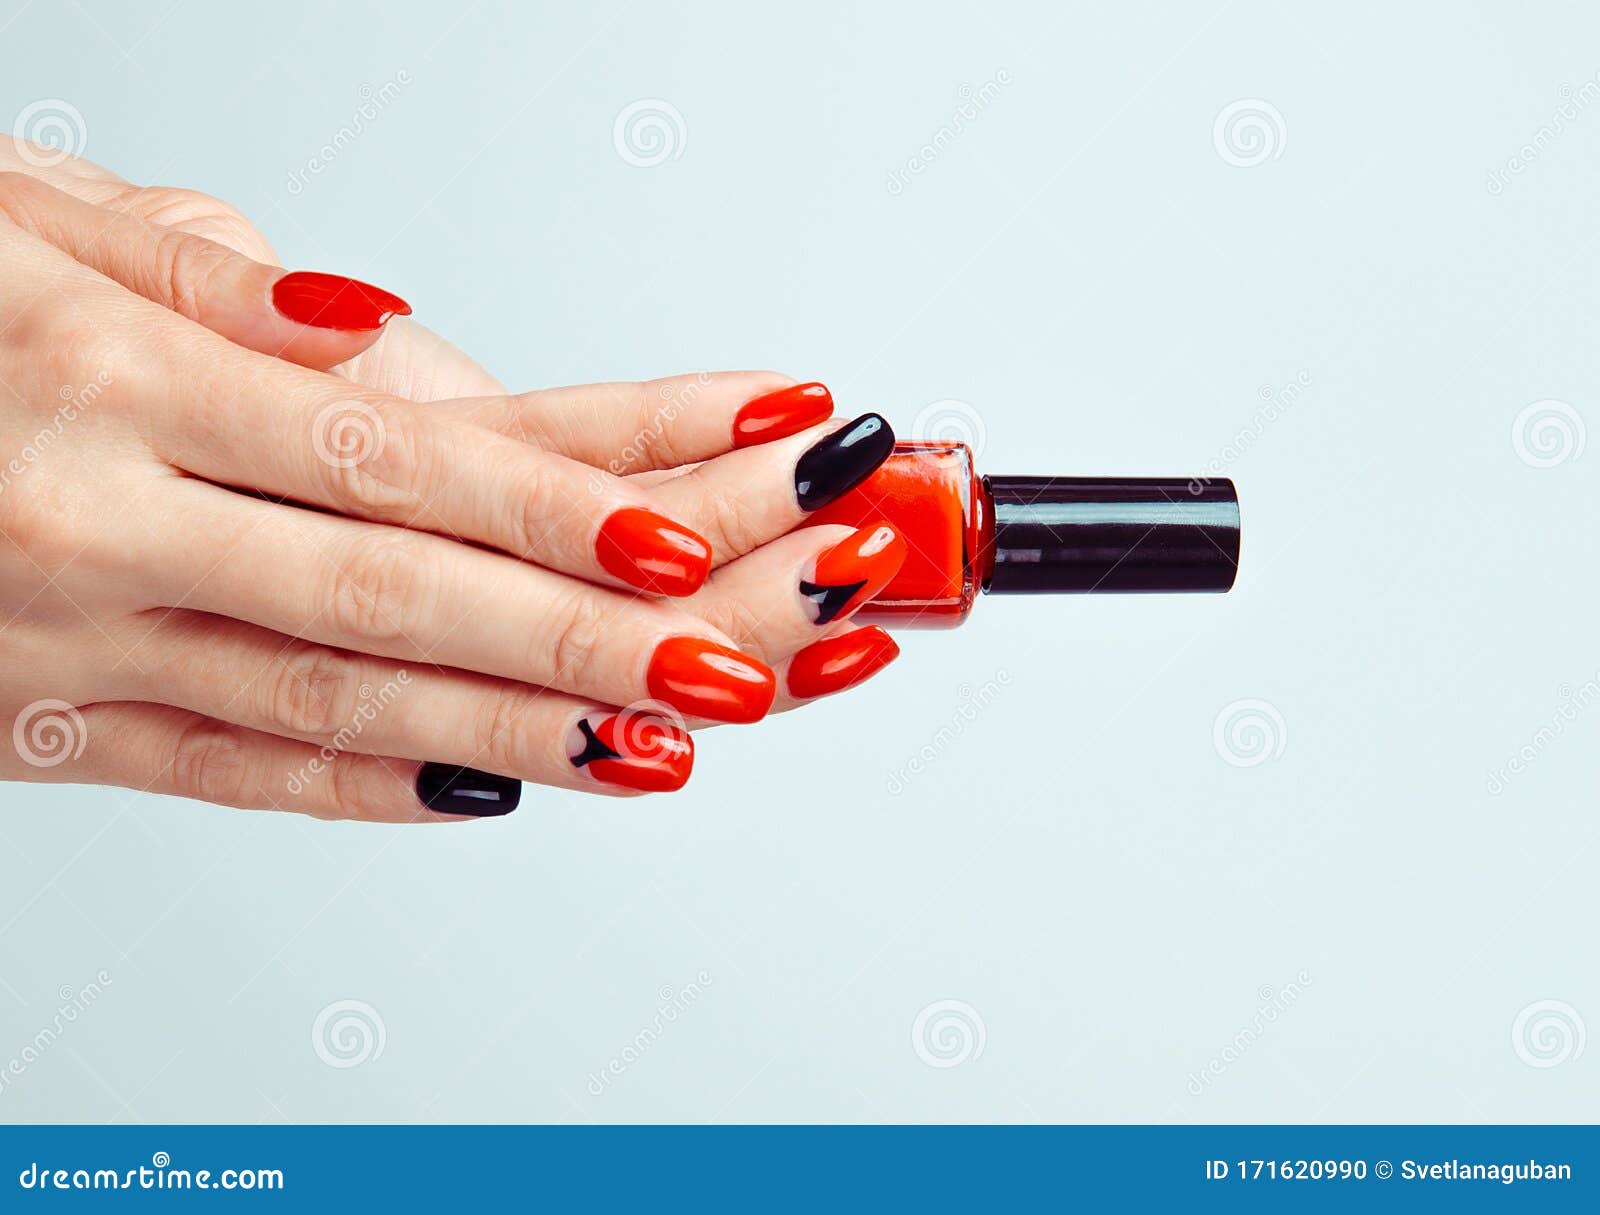 Woman Holding Bottle of Red Nail Polish. Art Manicure. Modern Style Red  Black Nail Polish Stock Photo - Image of care, cured: 171620990